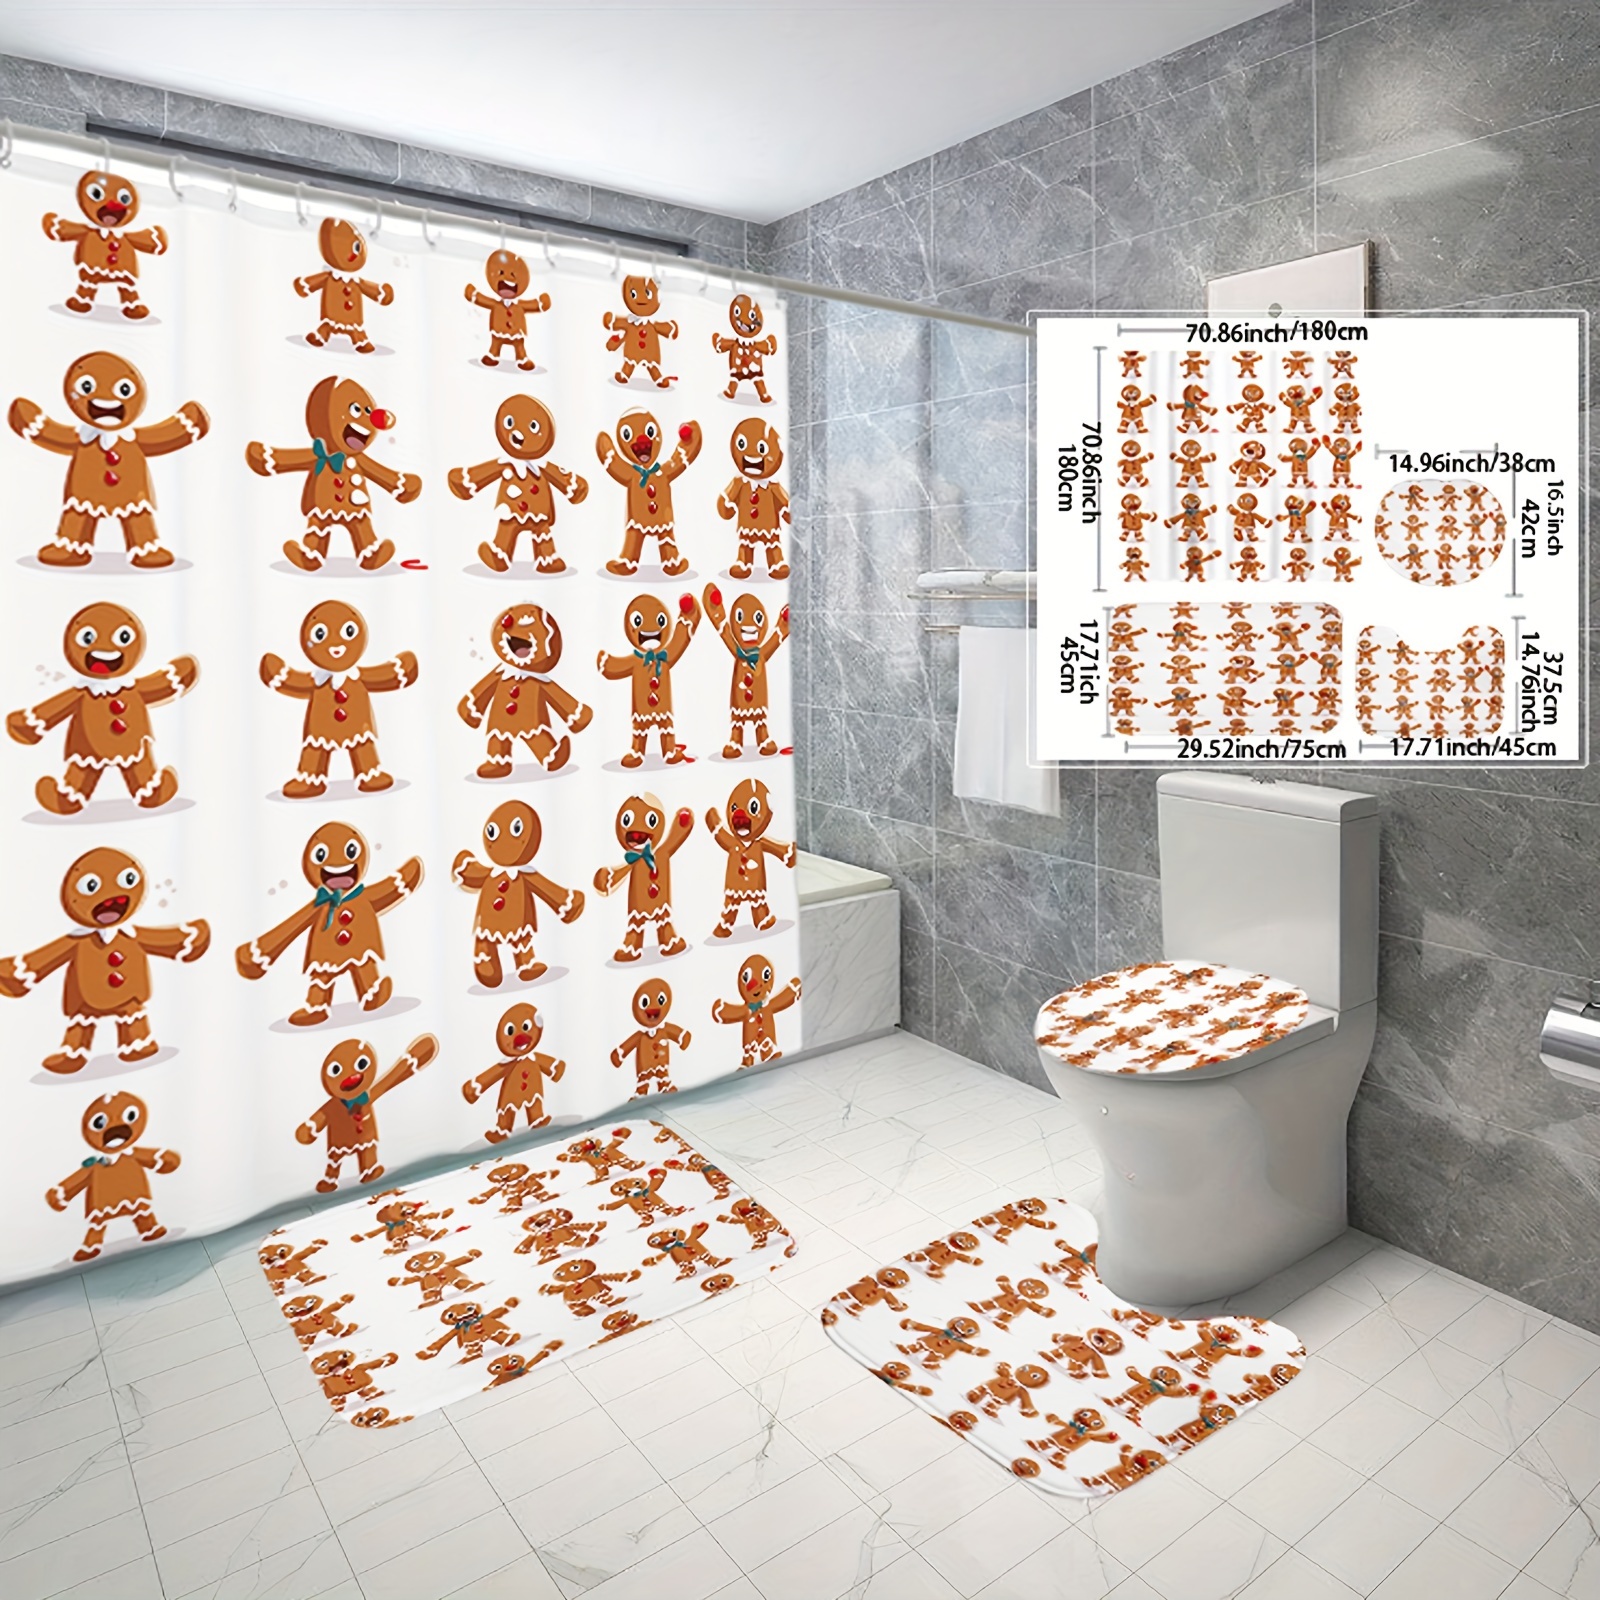 

Festive Gingerbread Man Christmas Shower Curtain Set: Includes 1/3/4 Pcs, 12 Hooks, Bathroom Rugs, Toilet Seat Cover, And U-shaped Mat - Perfect For Walk-in Showers